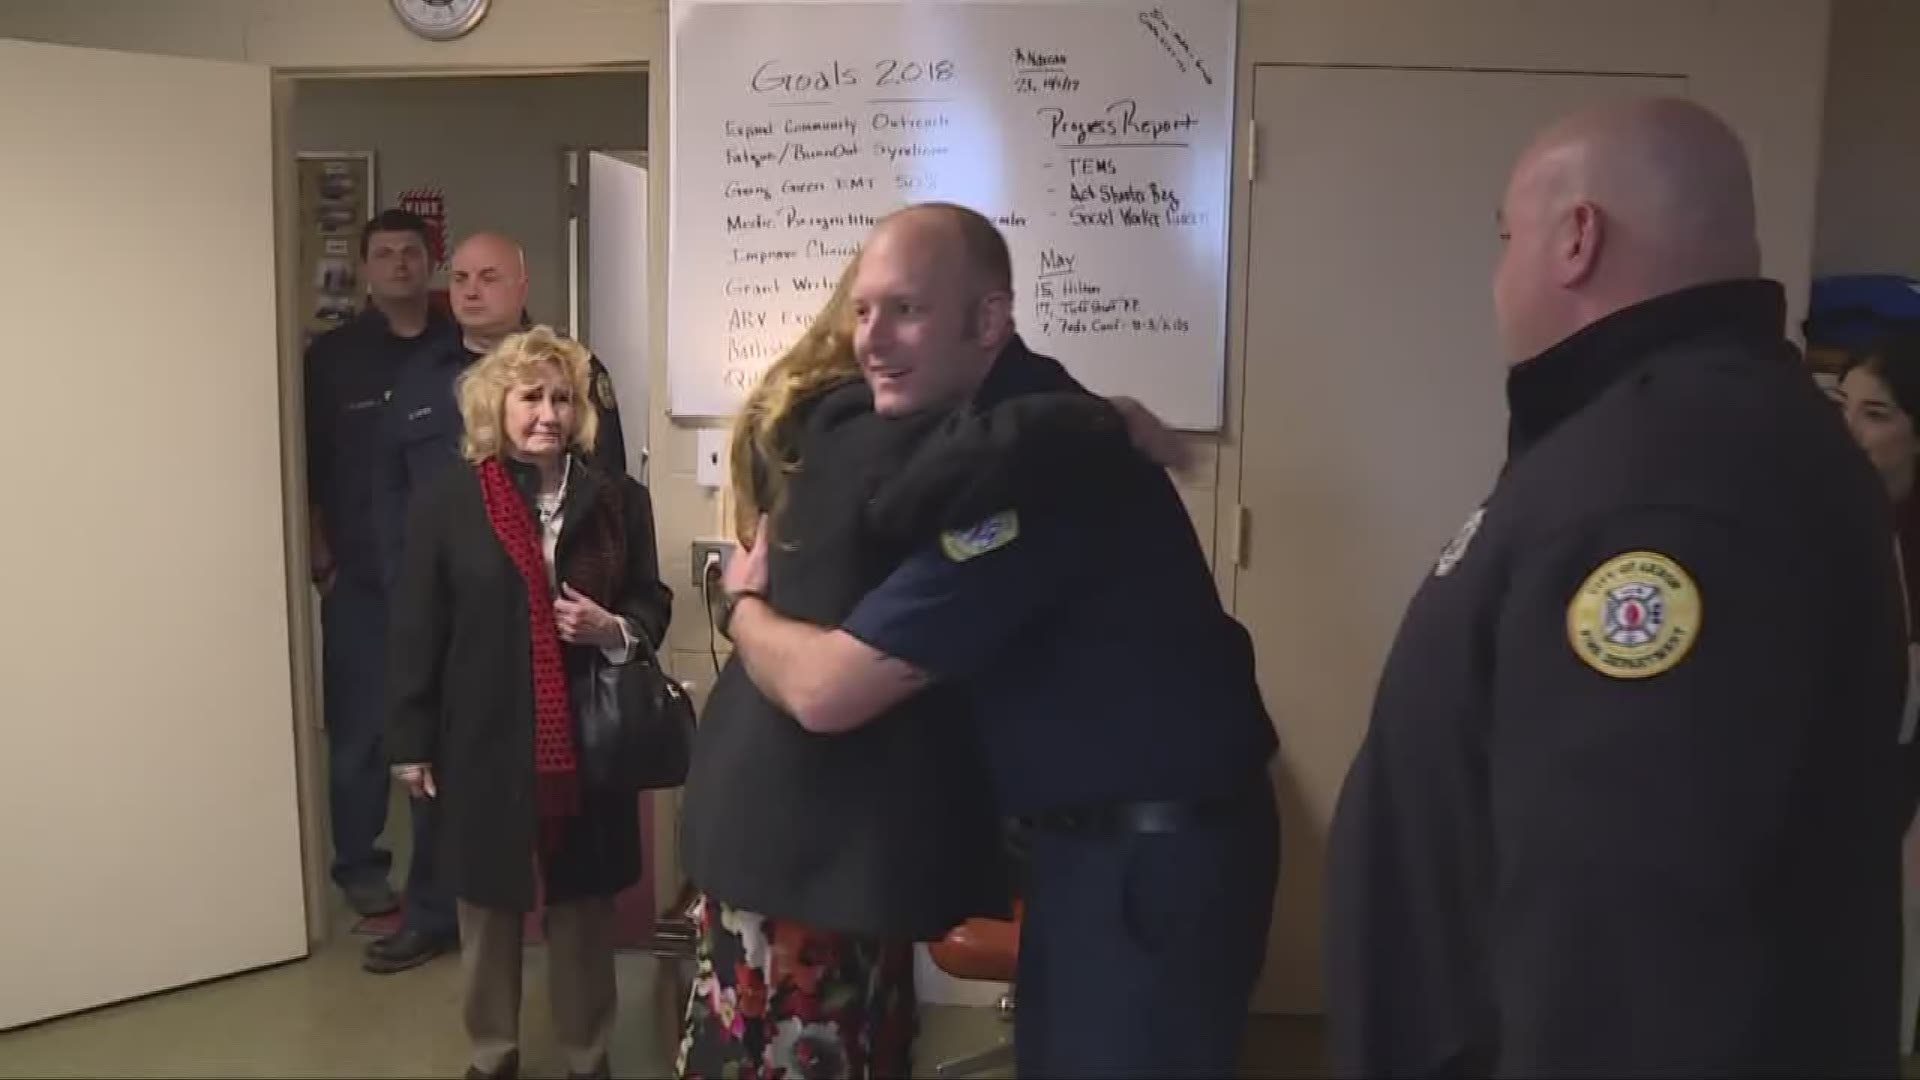 Almost 3 years after heroin overdose, Barberton woman thanks first responders who saved her life